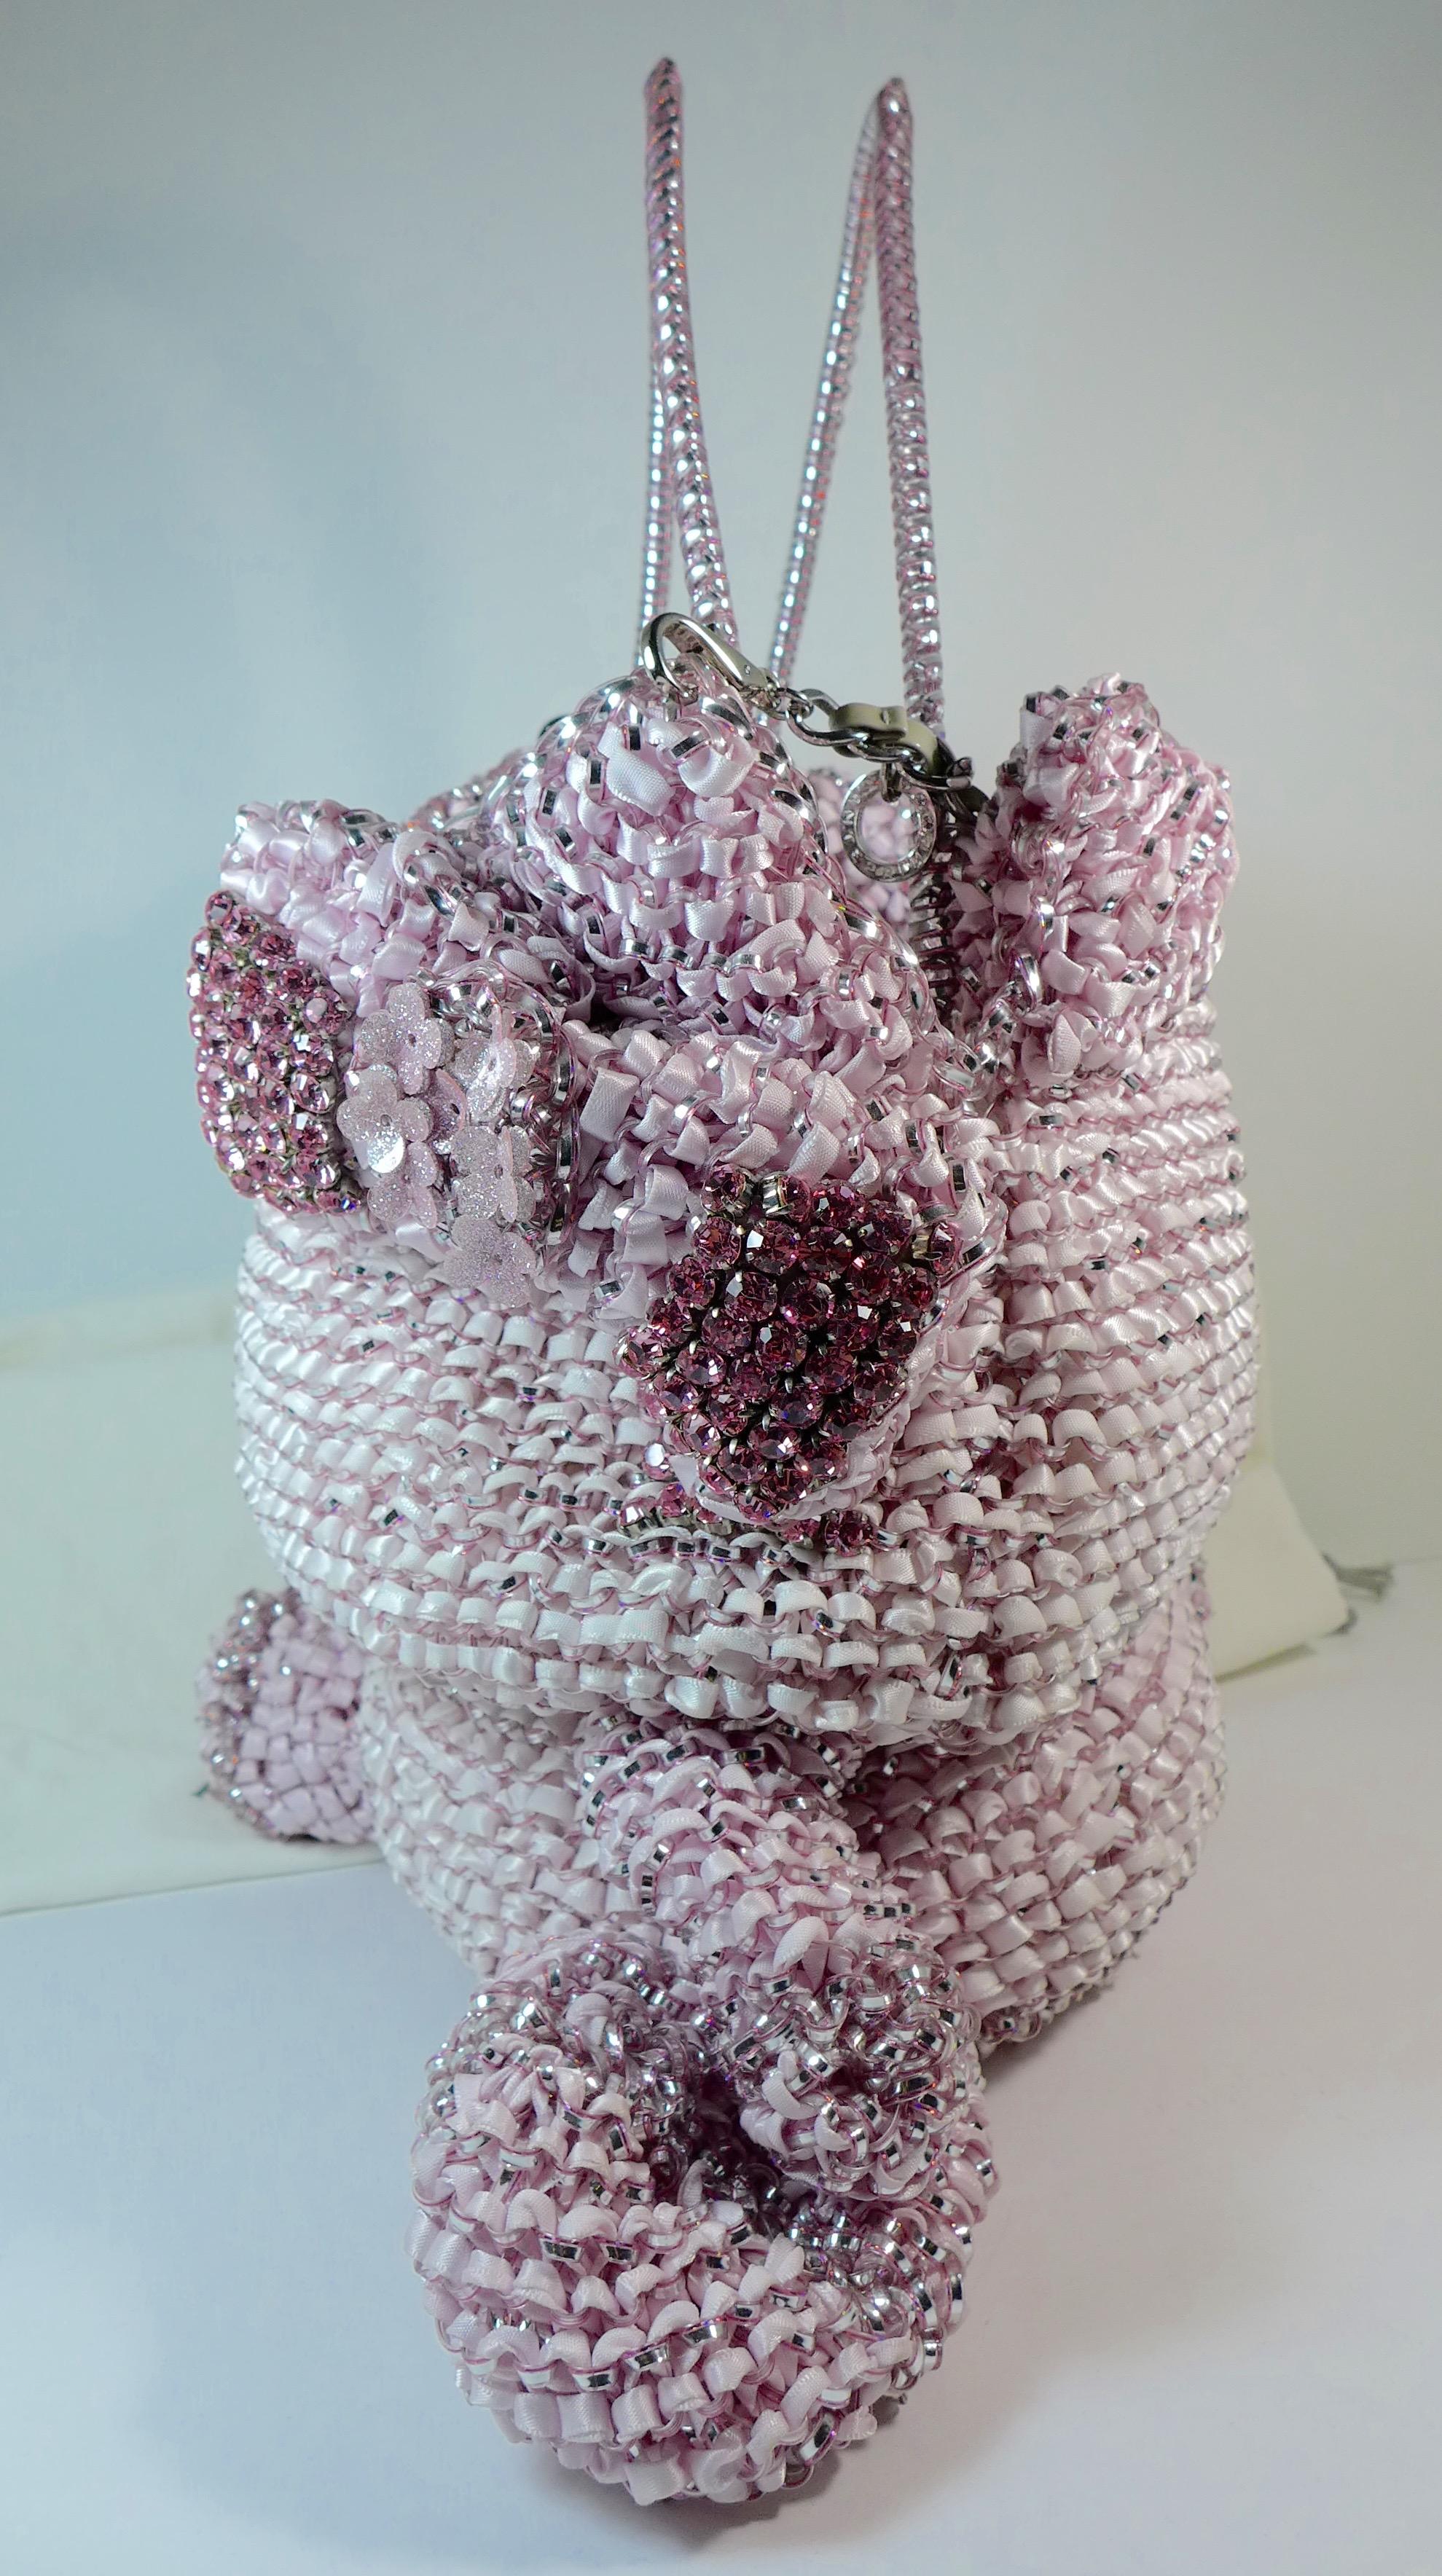 This unique ribbon and plastic woven bag is in the shape of Hello Kitty. The bag features pink rhinestone embellishments and a silver detachable chain strap as well as plastic handles. It comes with a dust bag. 

Measurements in Inches:
Length: 8